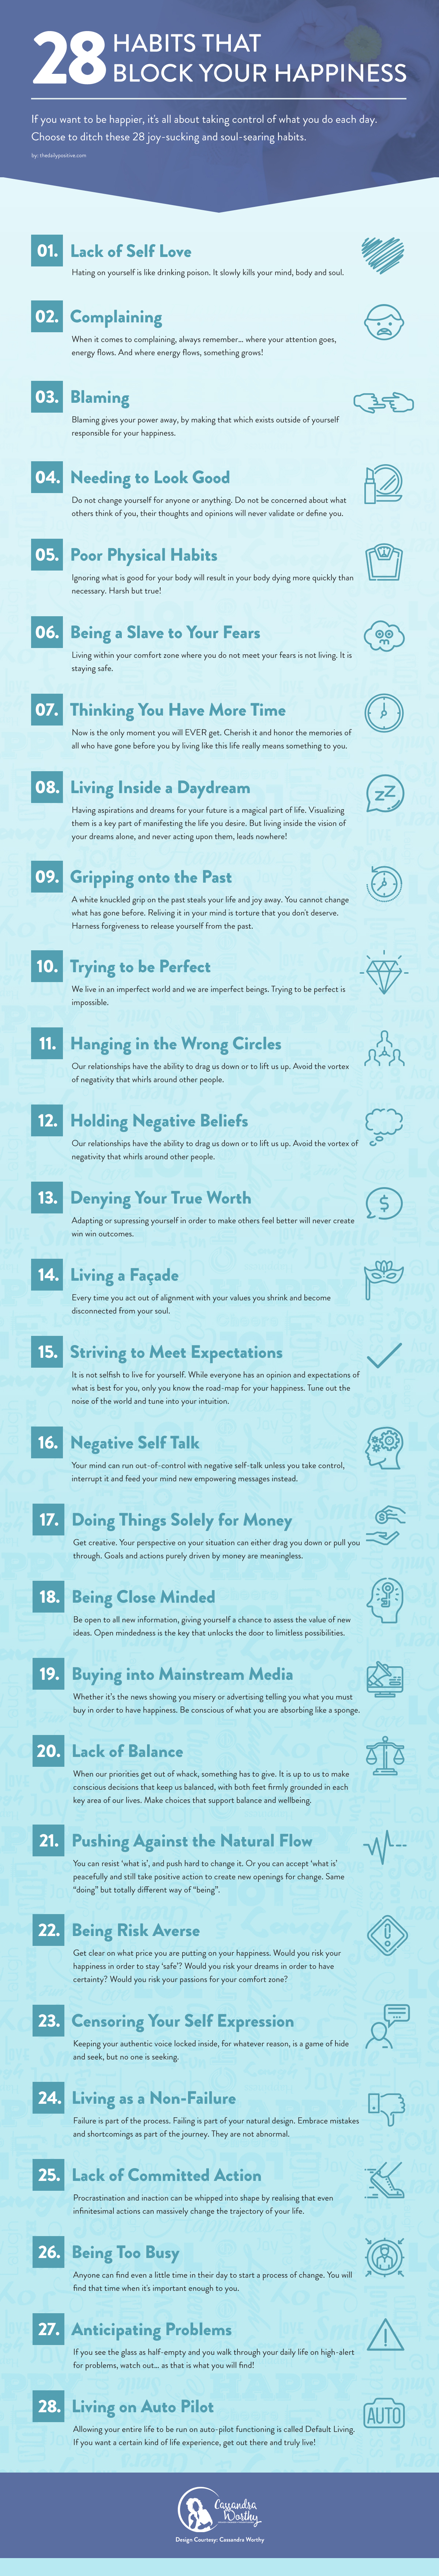 Happiness is an Inside Job- 28 Habits that Block Happiness - Infographic